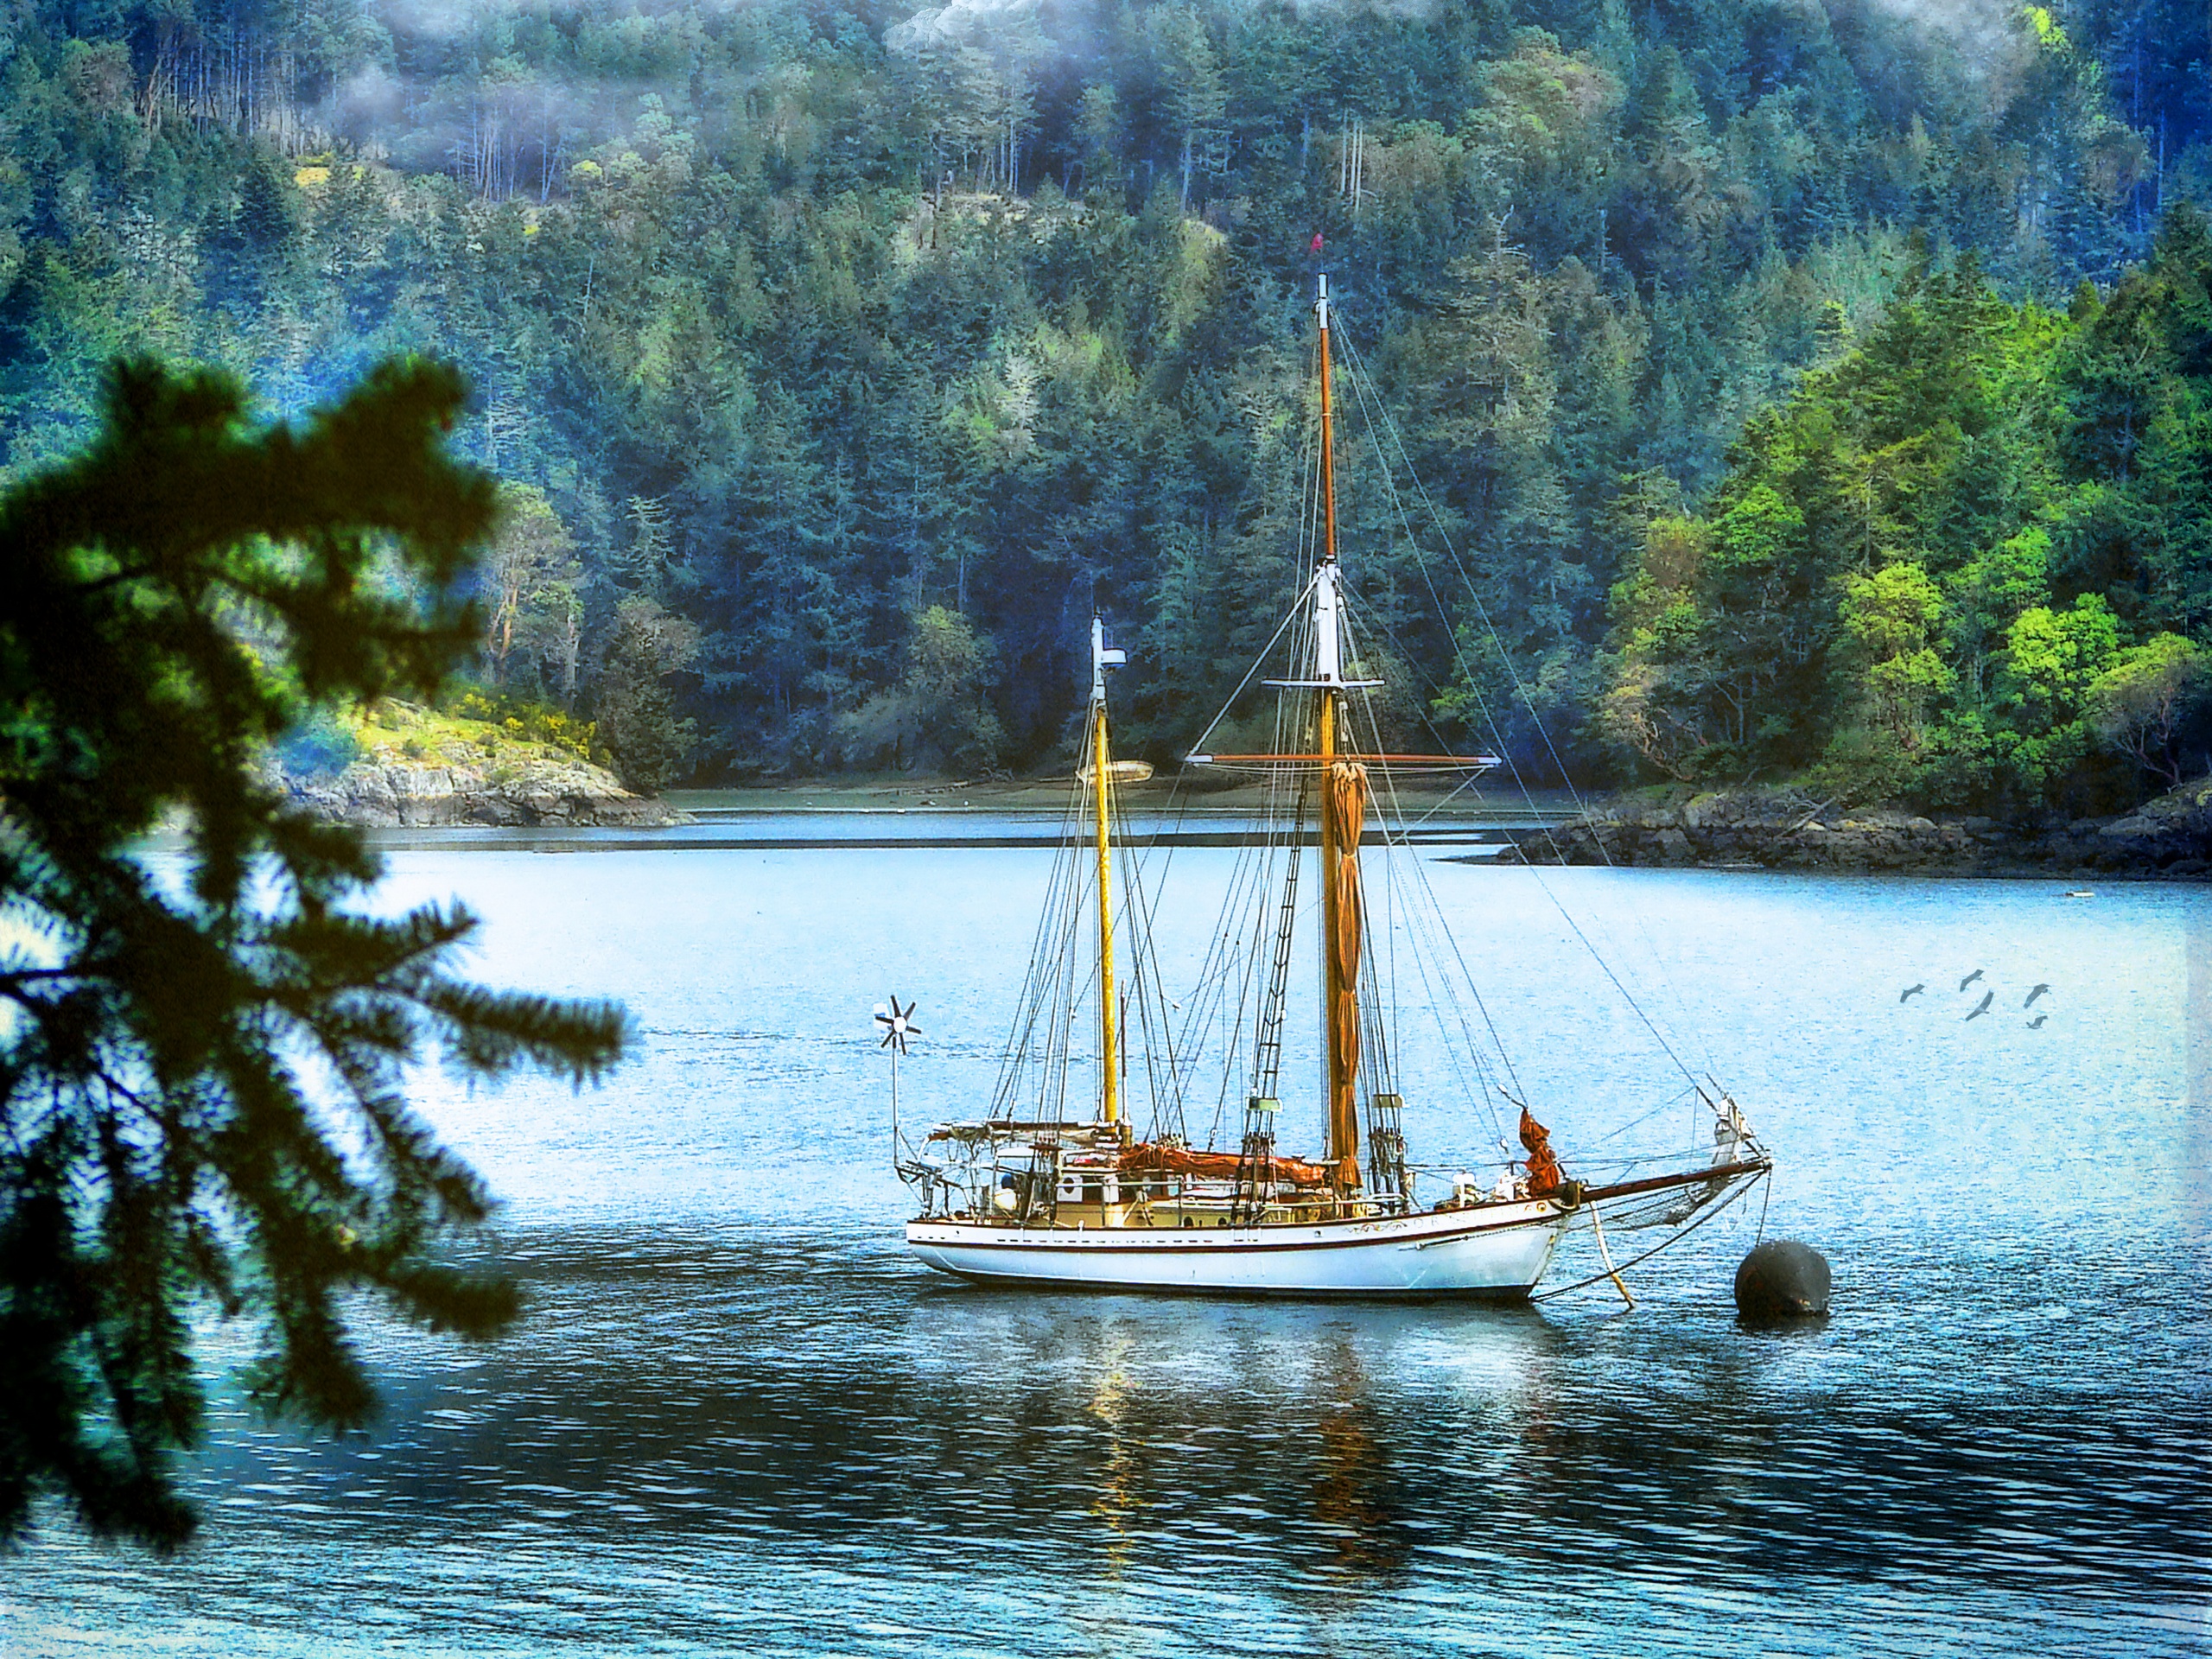 photography, hdr, boat, forest, green, lake, sailboat